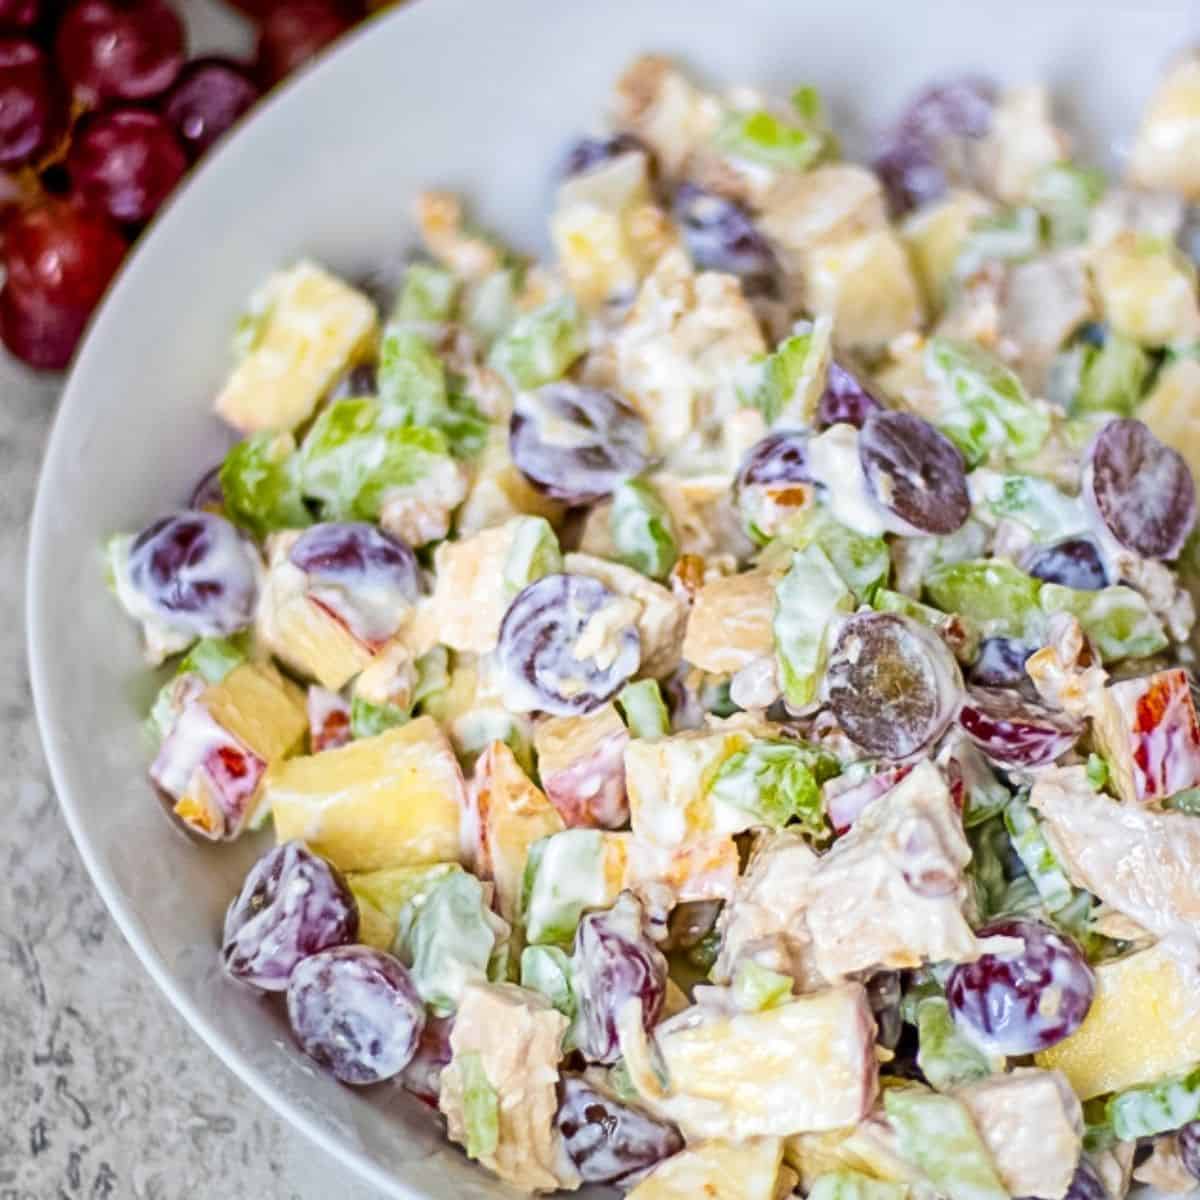 Bowl with chicken, grapes, apples, and chicken mixed together with mayonnaise based dressing. 